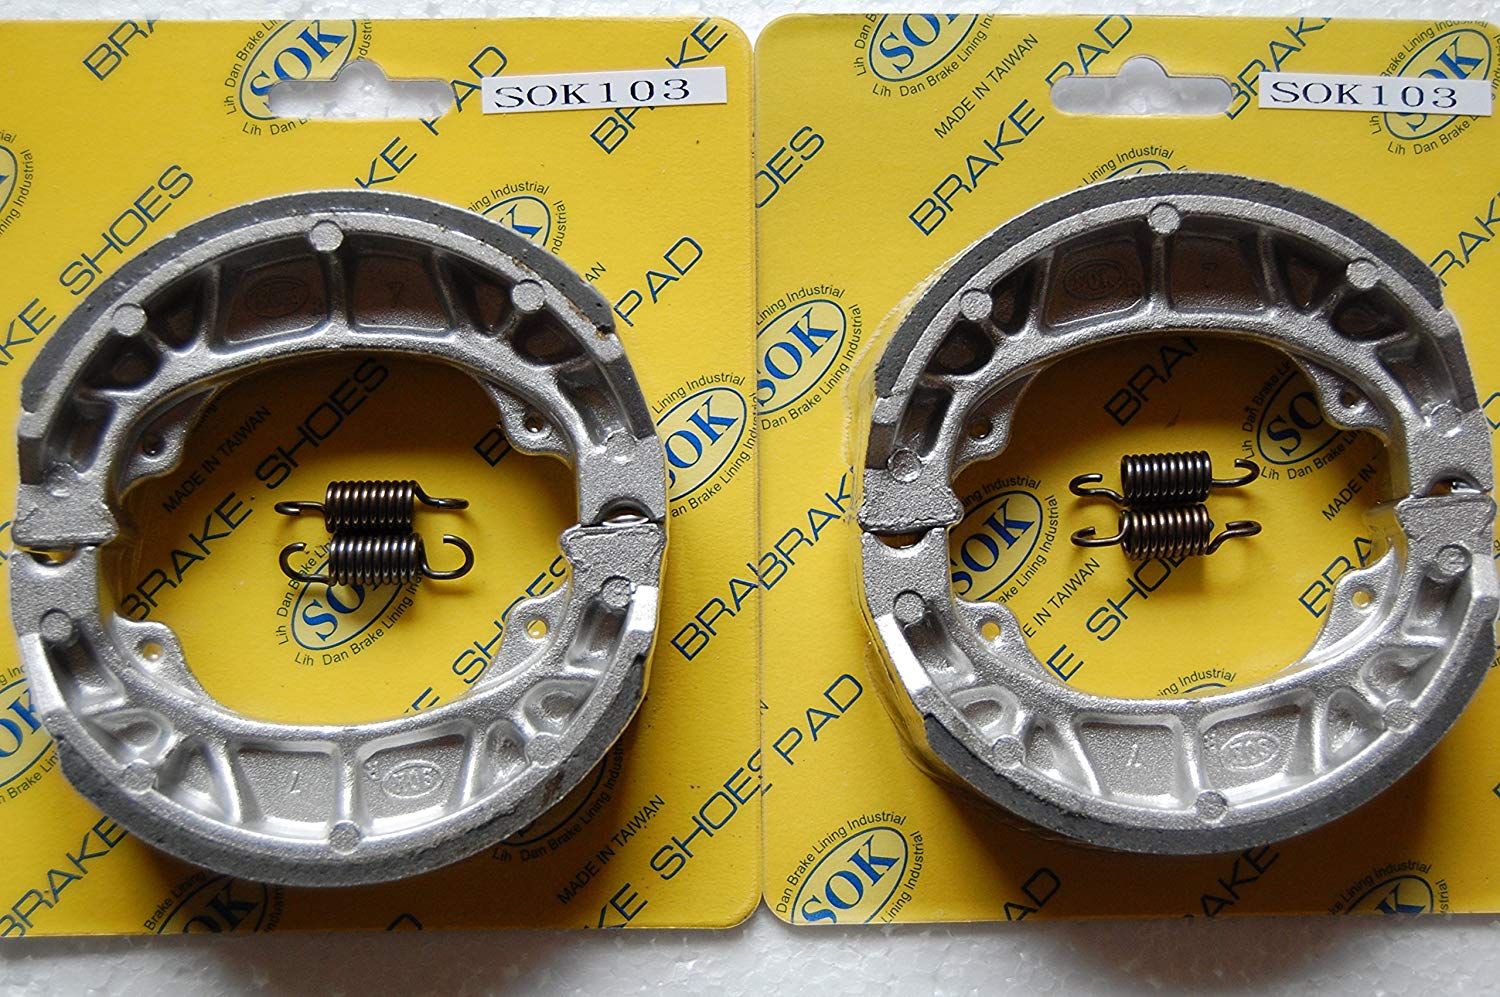 FRONT&REAR BRAKE SHOES+Springs for HONDA Trail, 1969-1975 CT70, 1966-1974 CT90, 1964-1966 CT200 (SK103WS x2)